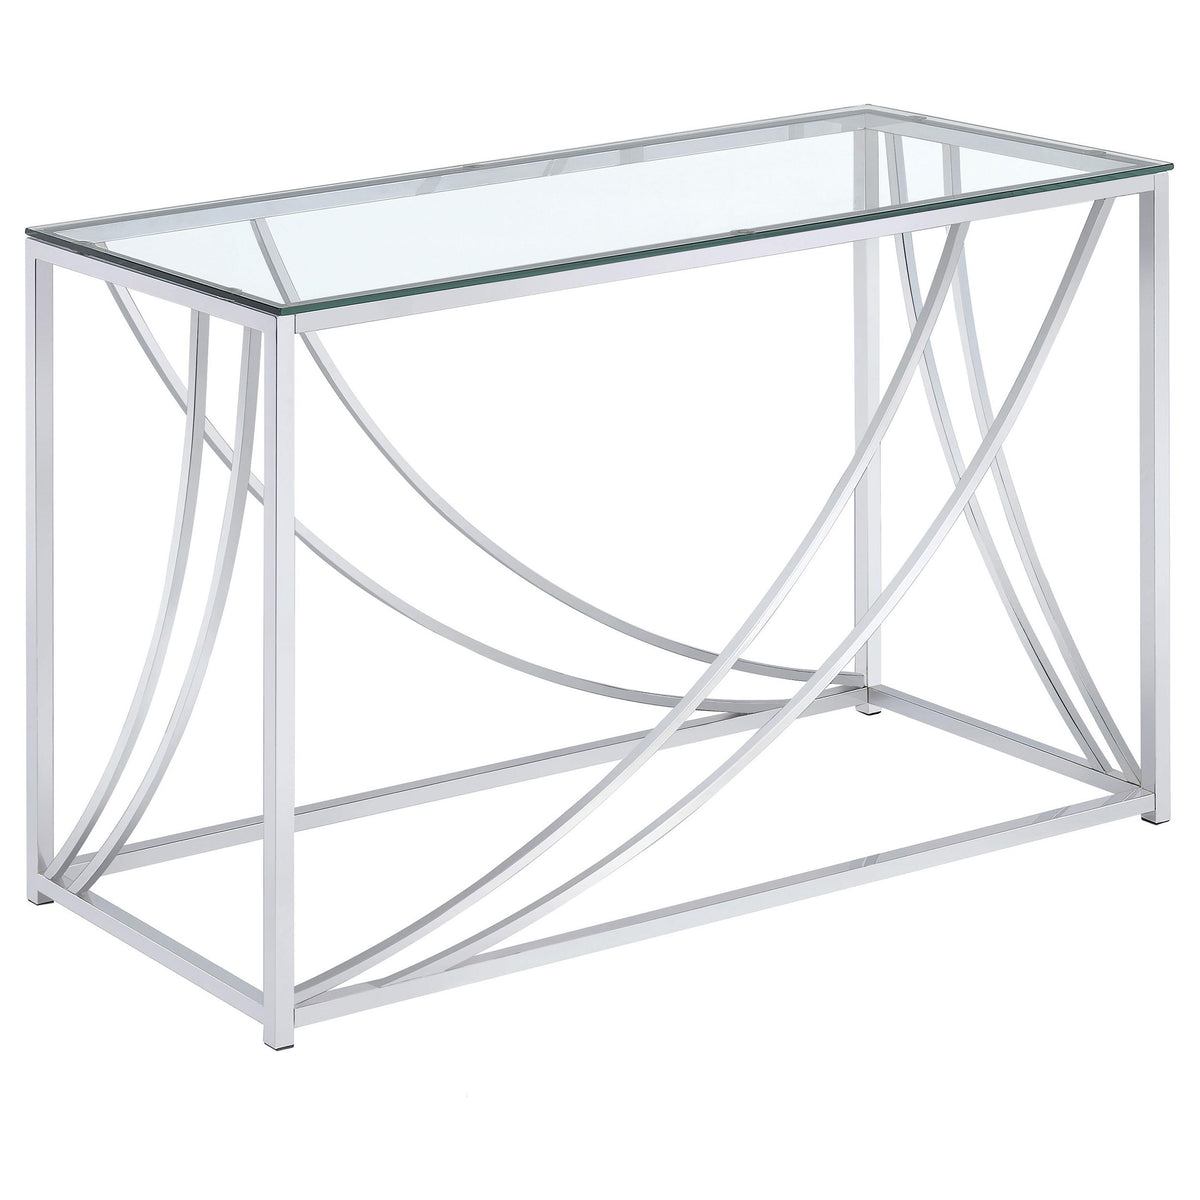 Lille Glass Top Rectangular Sofa Table Accents Chrome Lille Glass Top Rectangular Sofa Table Accents Chrome Half Price Furniture